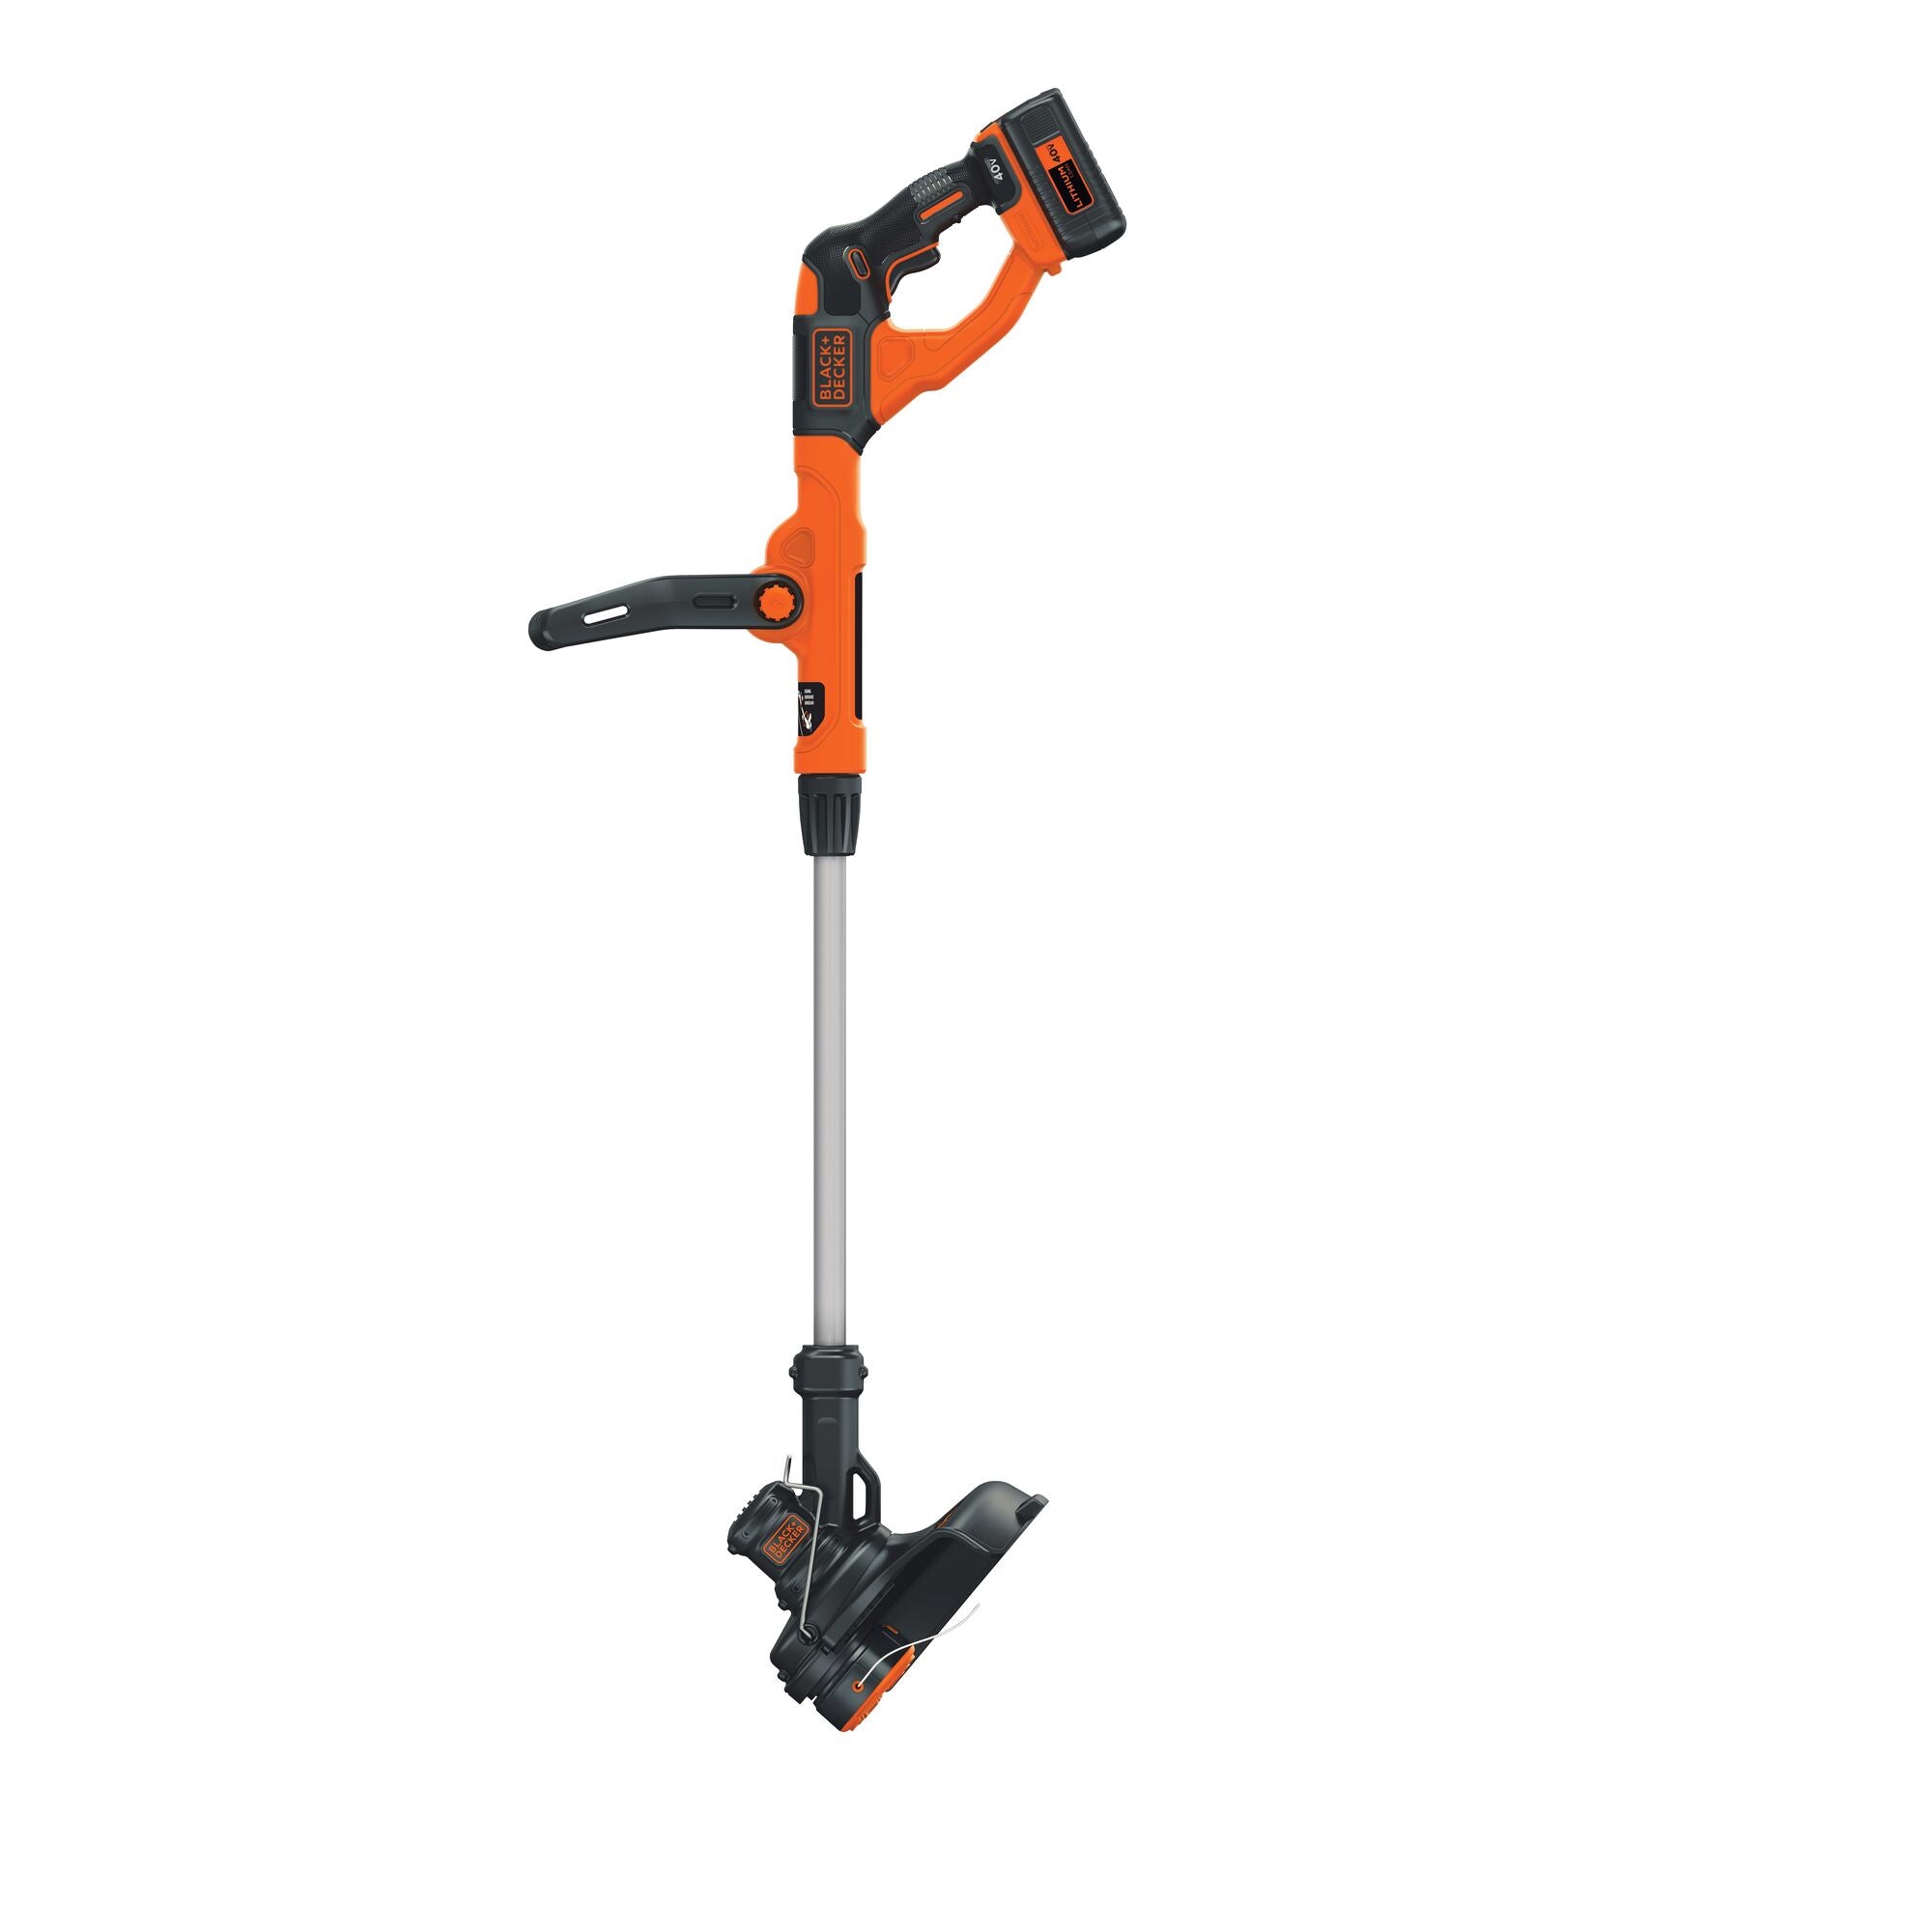 Review of the Black&Decker 40V MAX Cordless Lithium String Trimmer